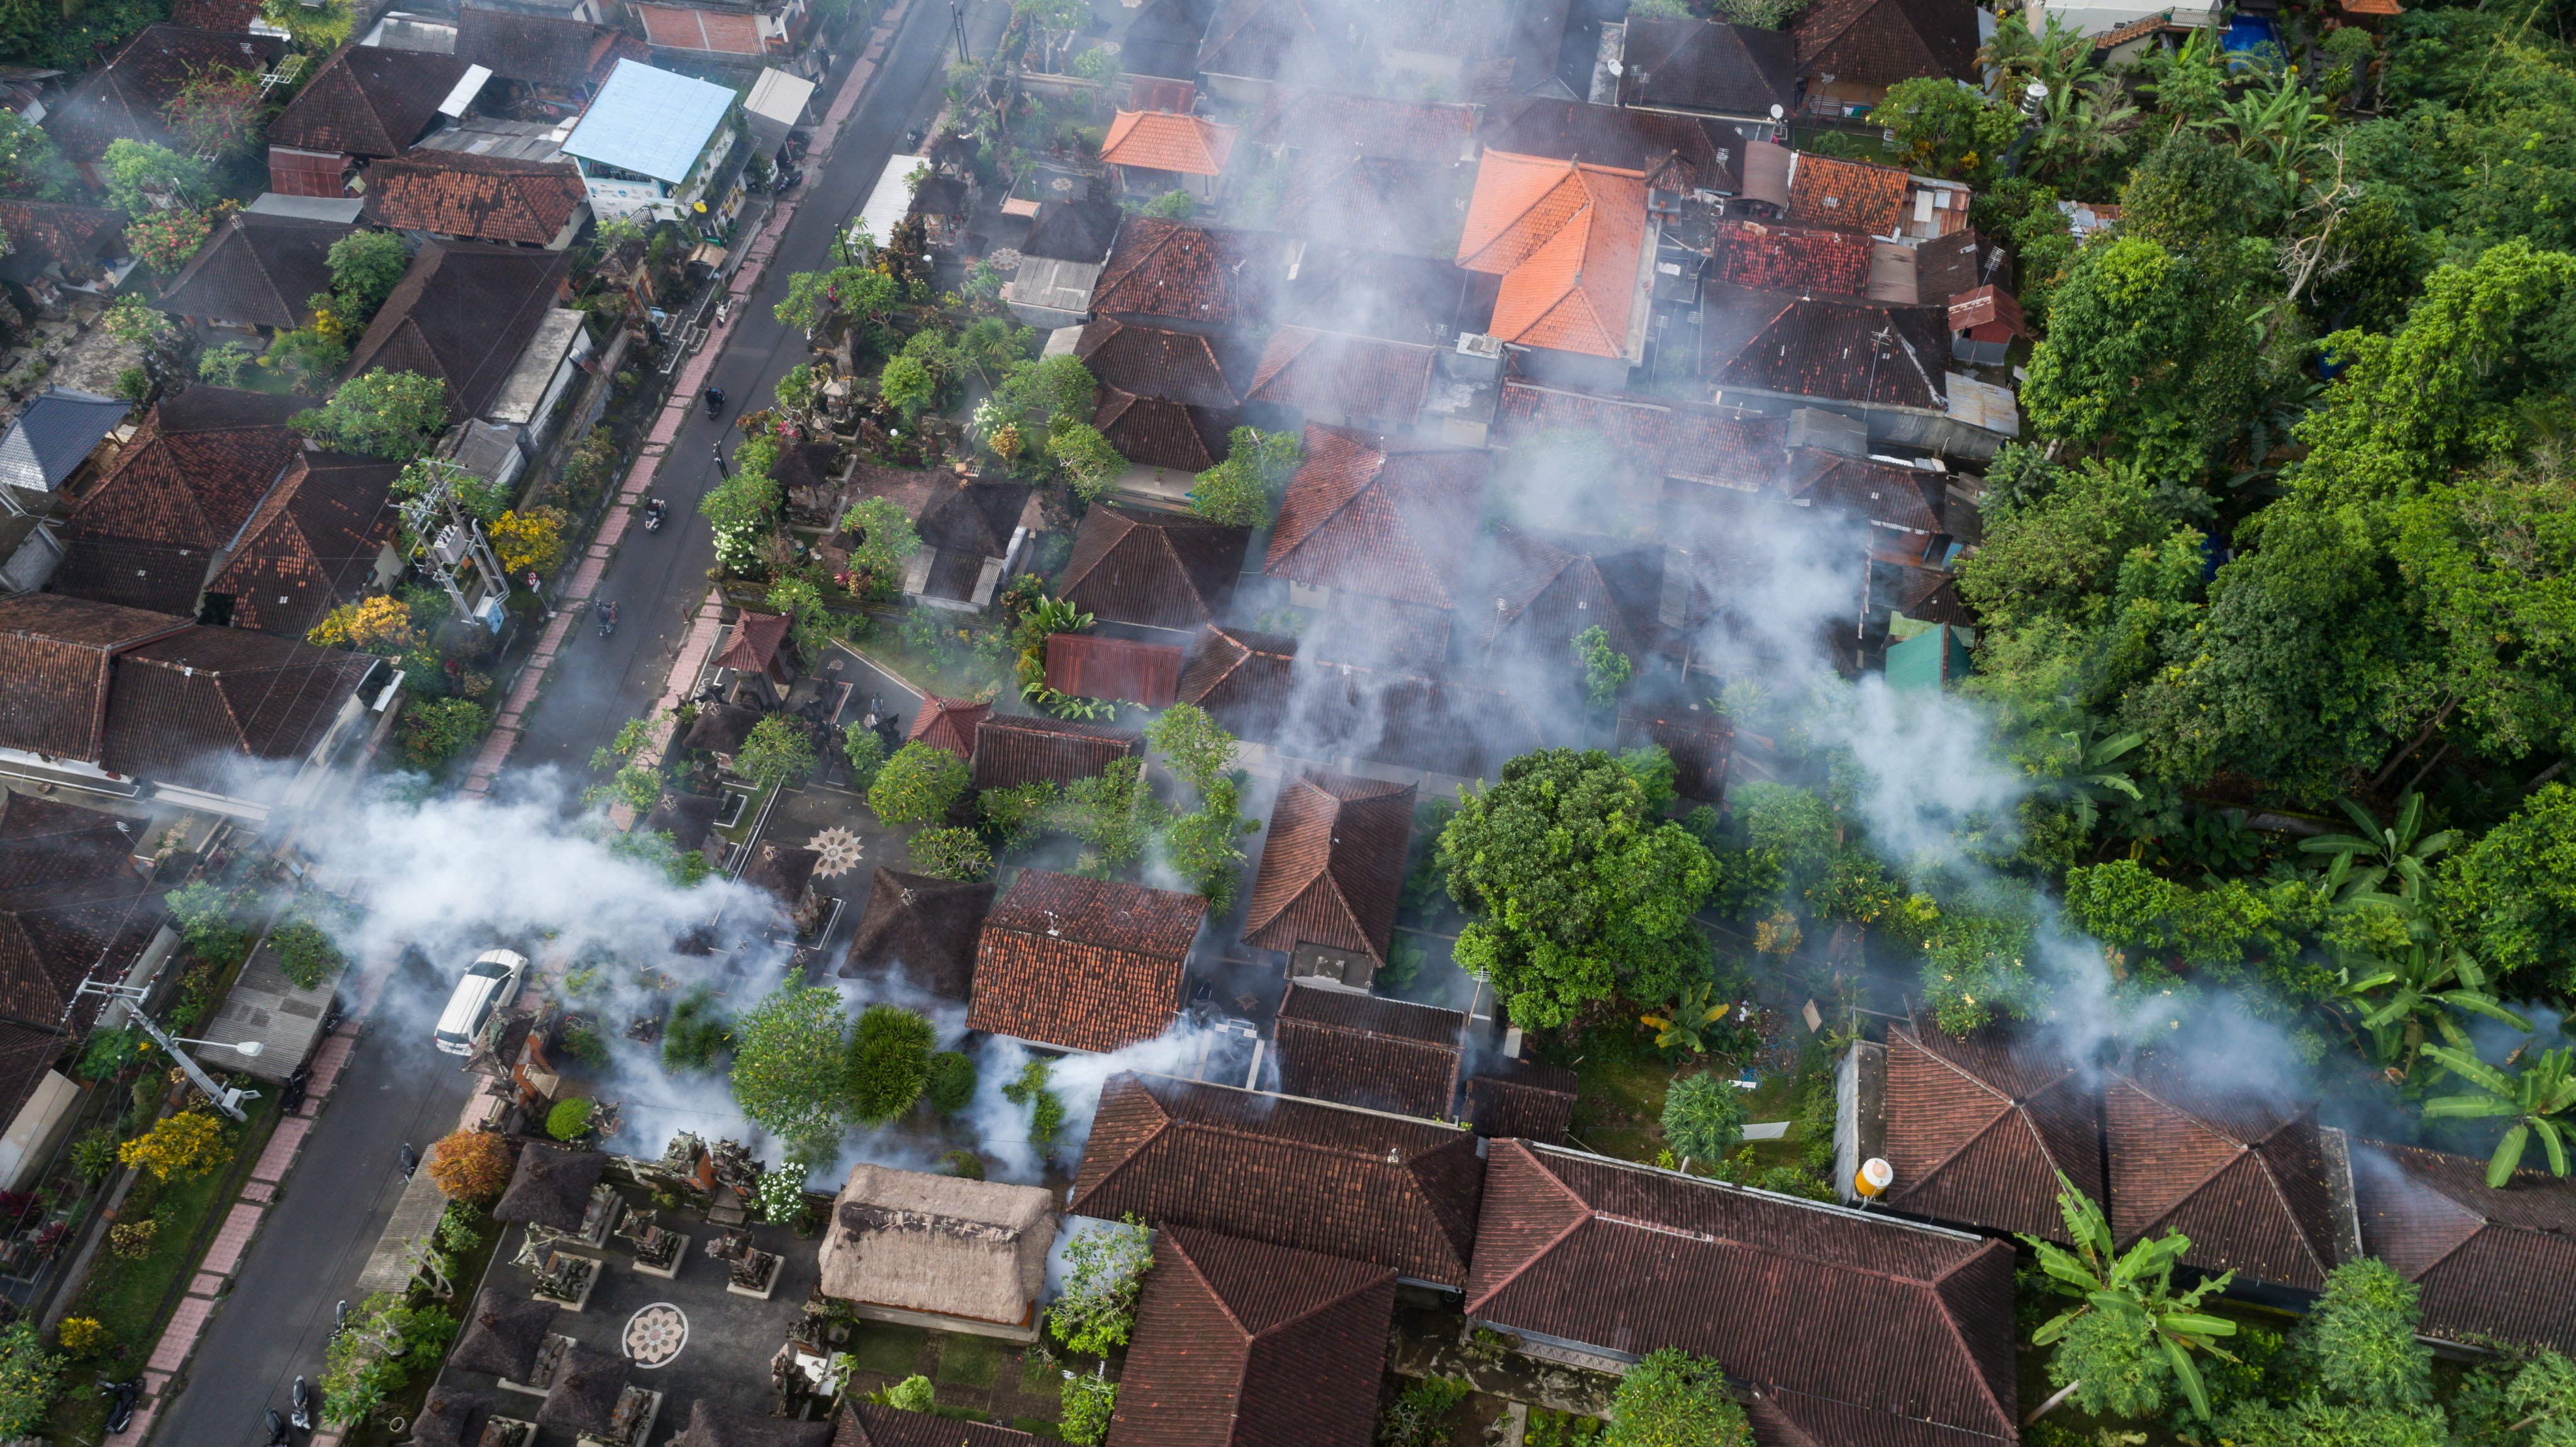 Indonesian workers fog a residential area in Ubud, Bali, with insecticides to kill the Aedes mosquito. Photo: Shutterstock 